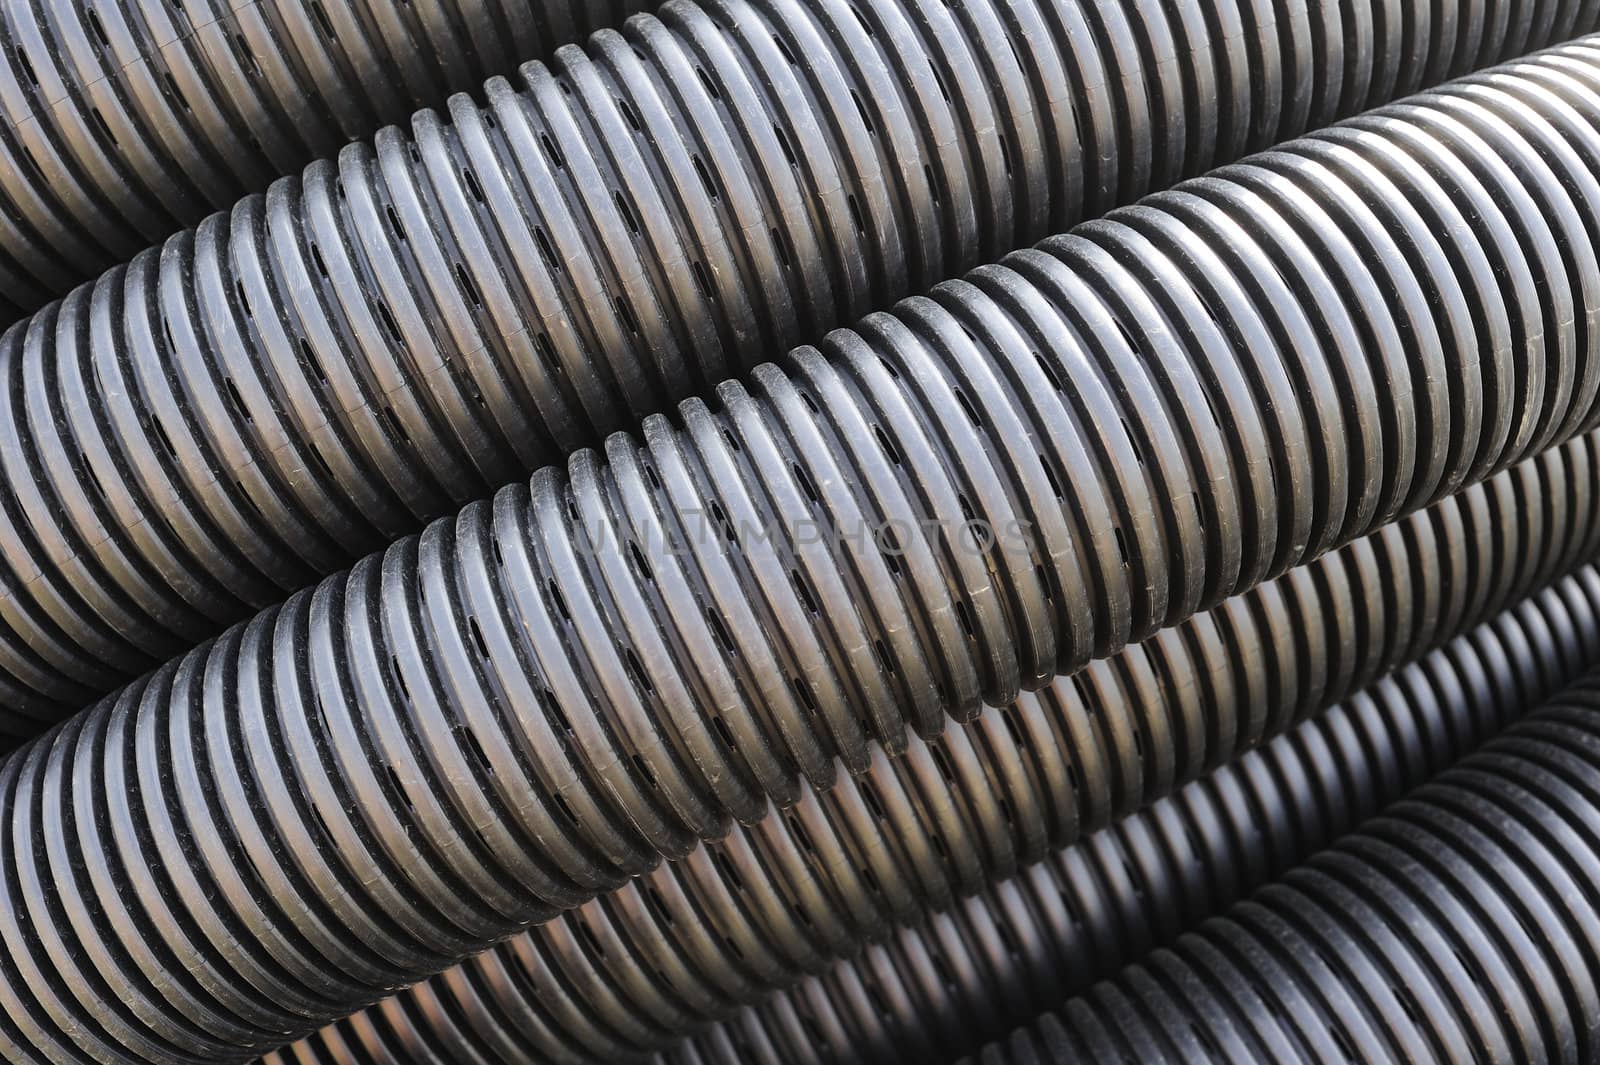 Close up of the pattern formed by a coil of black plastic pipework, suitable as abstract background.